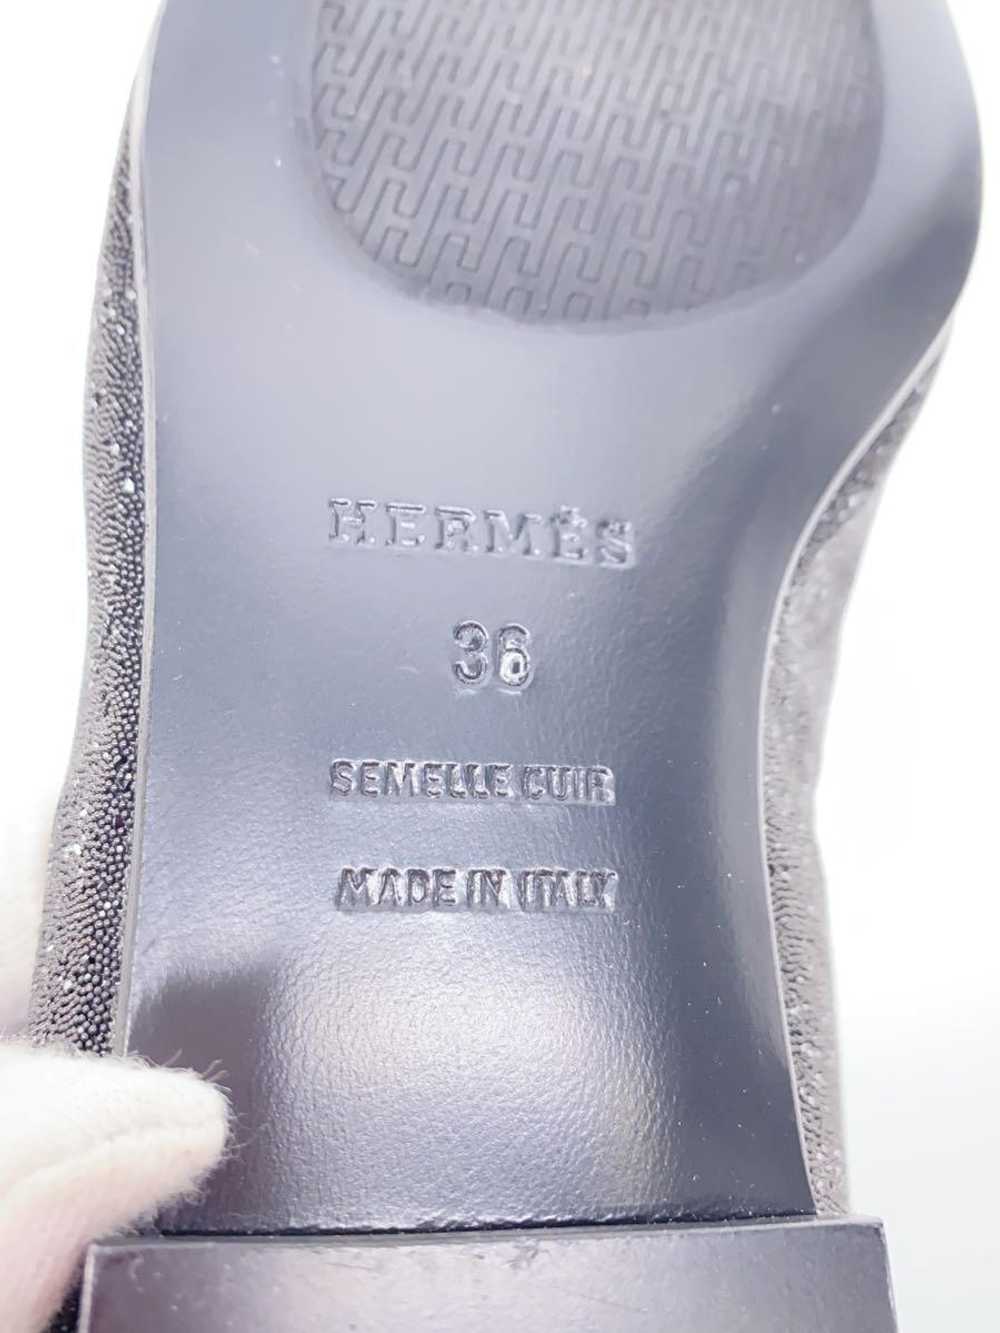 Hermes Flat Shoes/36/Blk/Glitter/ Shoes Bf220 - image 5